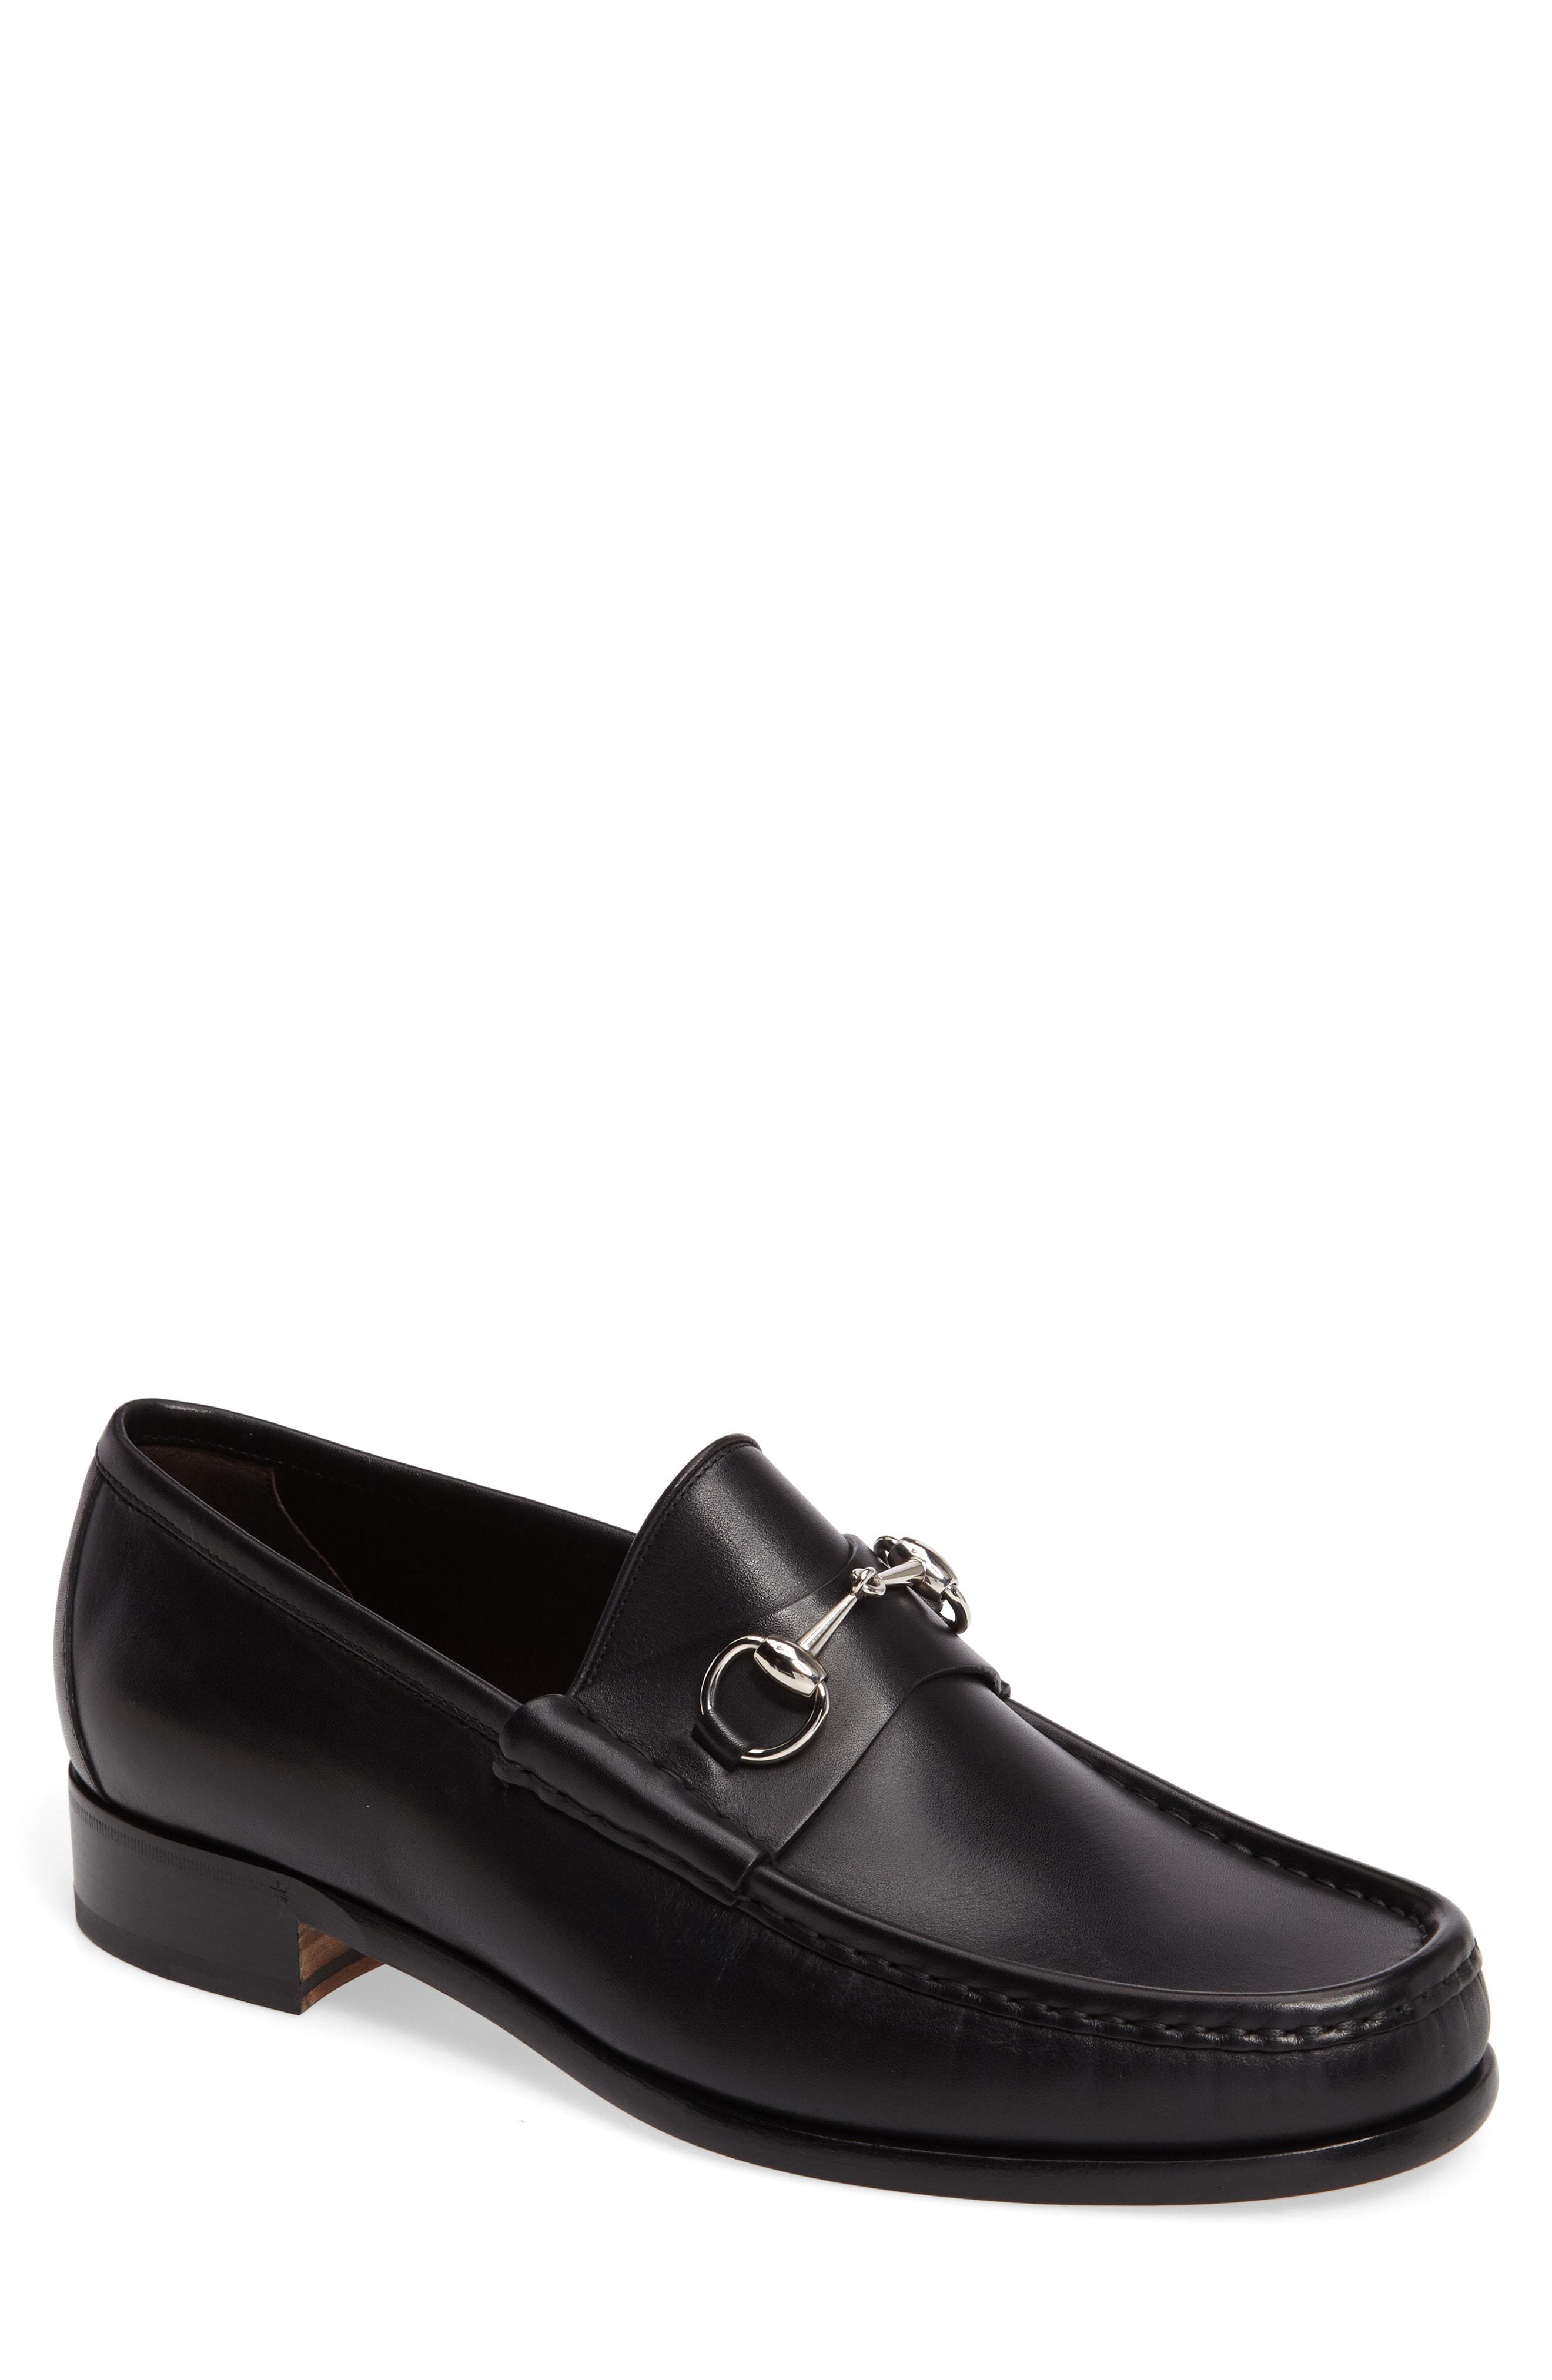 Gucci Classic Leather Moccasin in Black for Men - Lyst